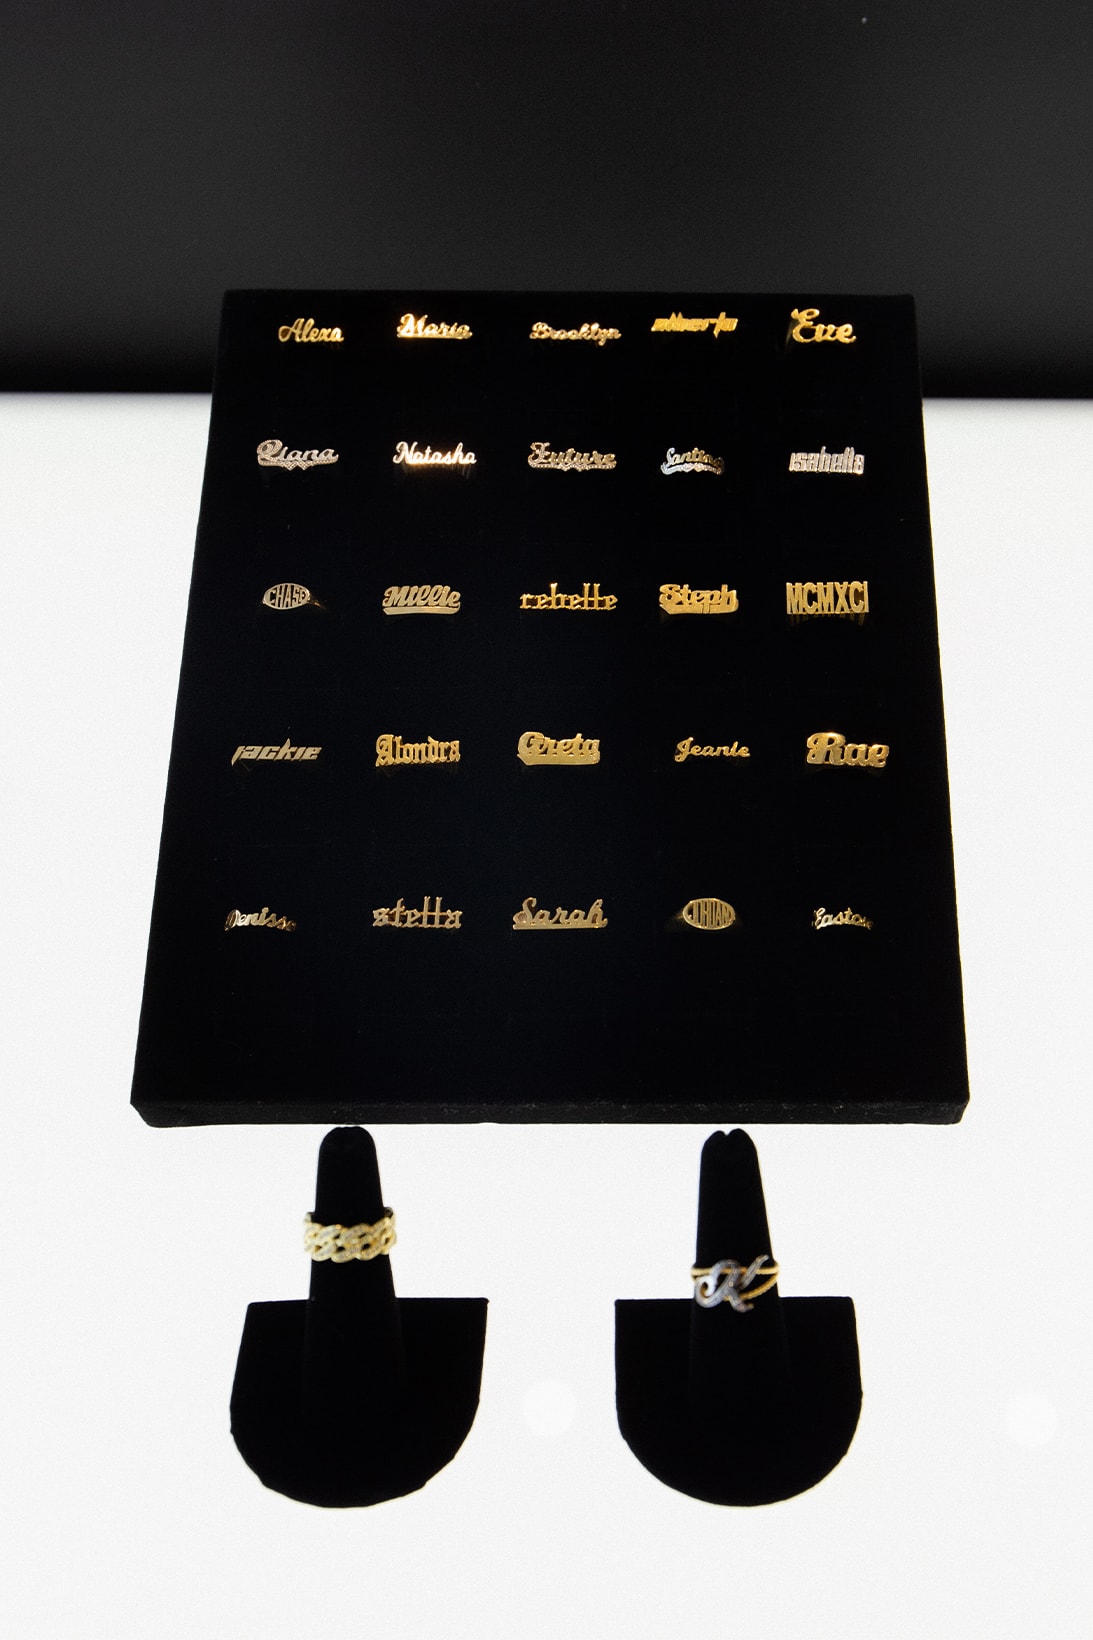 The M Jewelers NoLita Store New York Accessories Necklaces Earrings Valentine's Day Nameplates